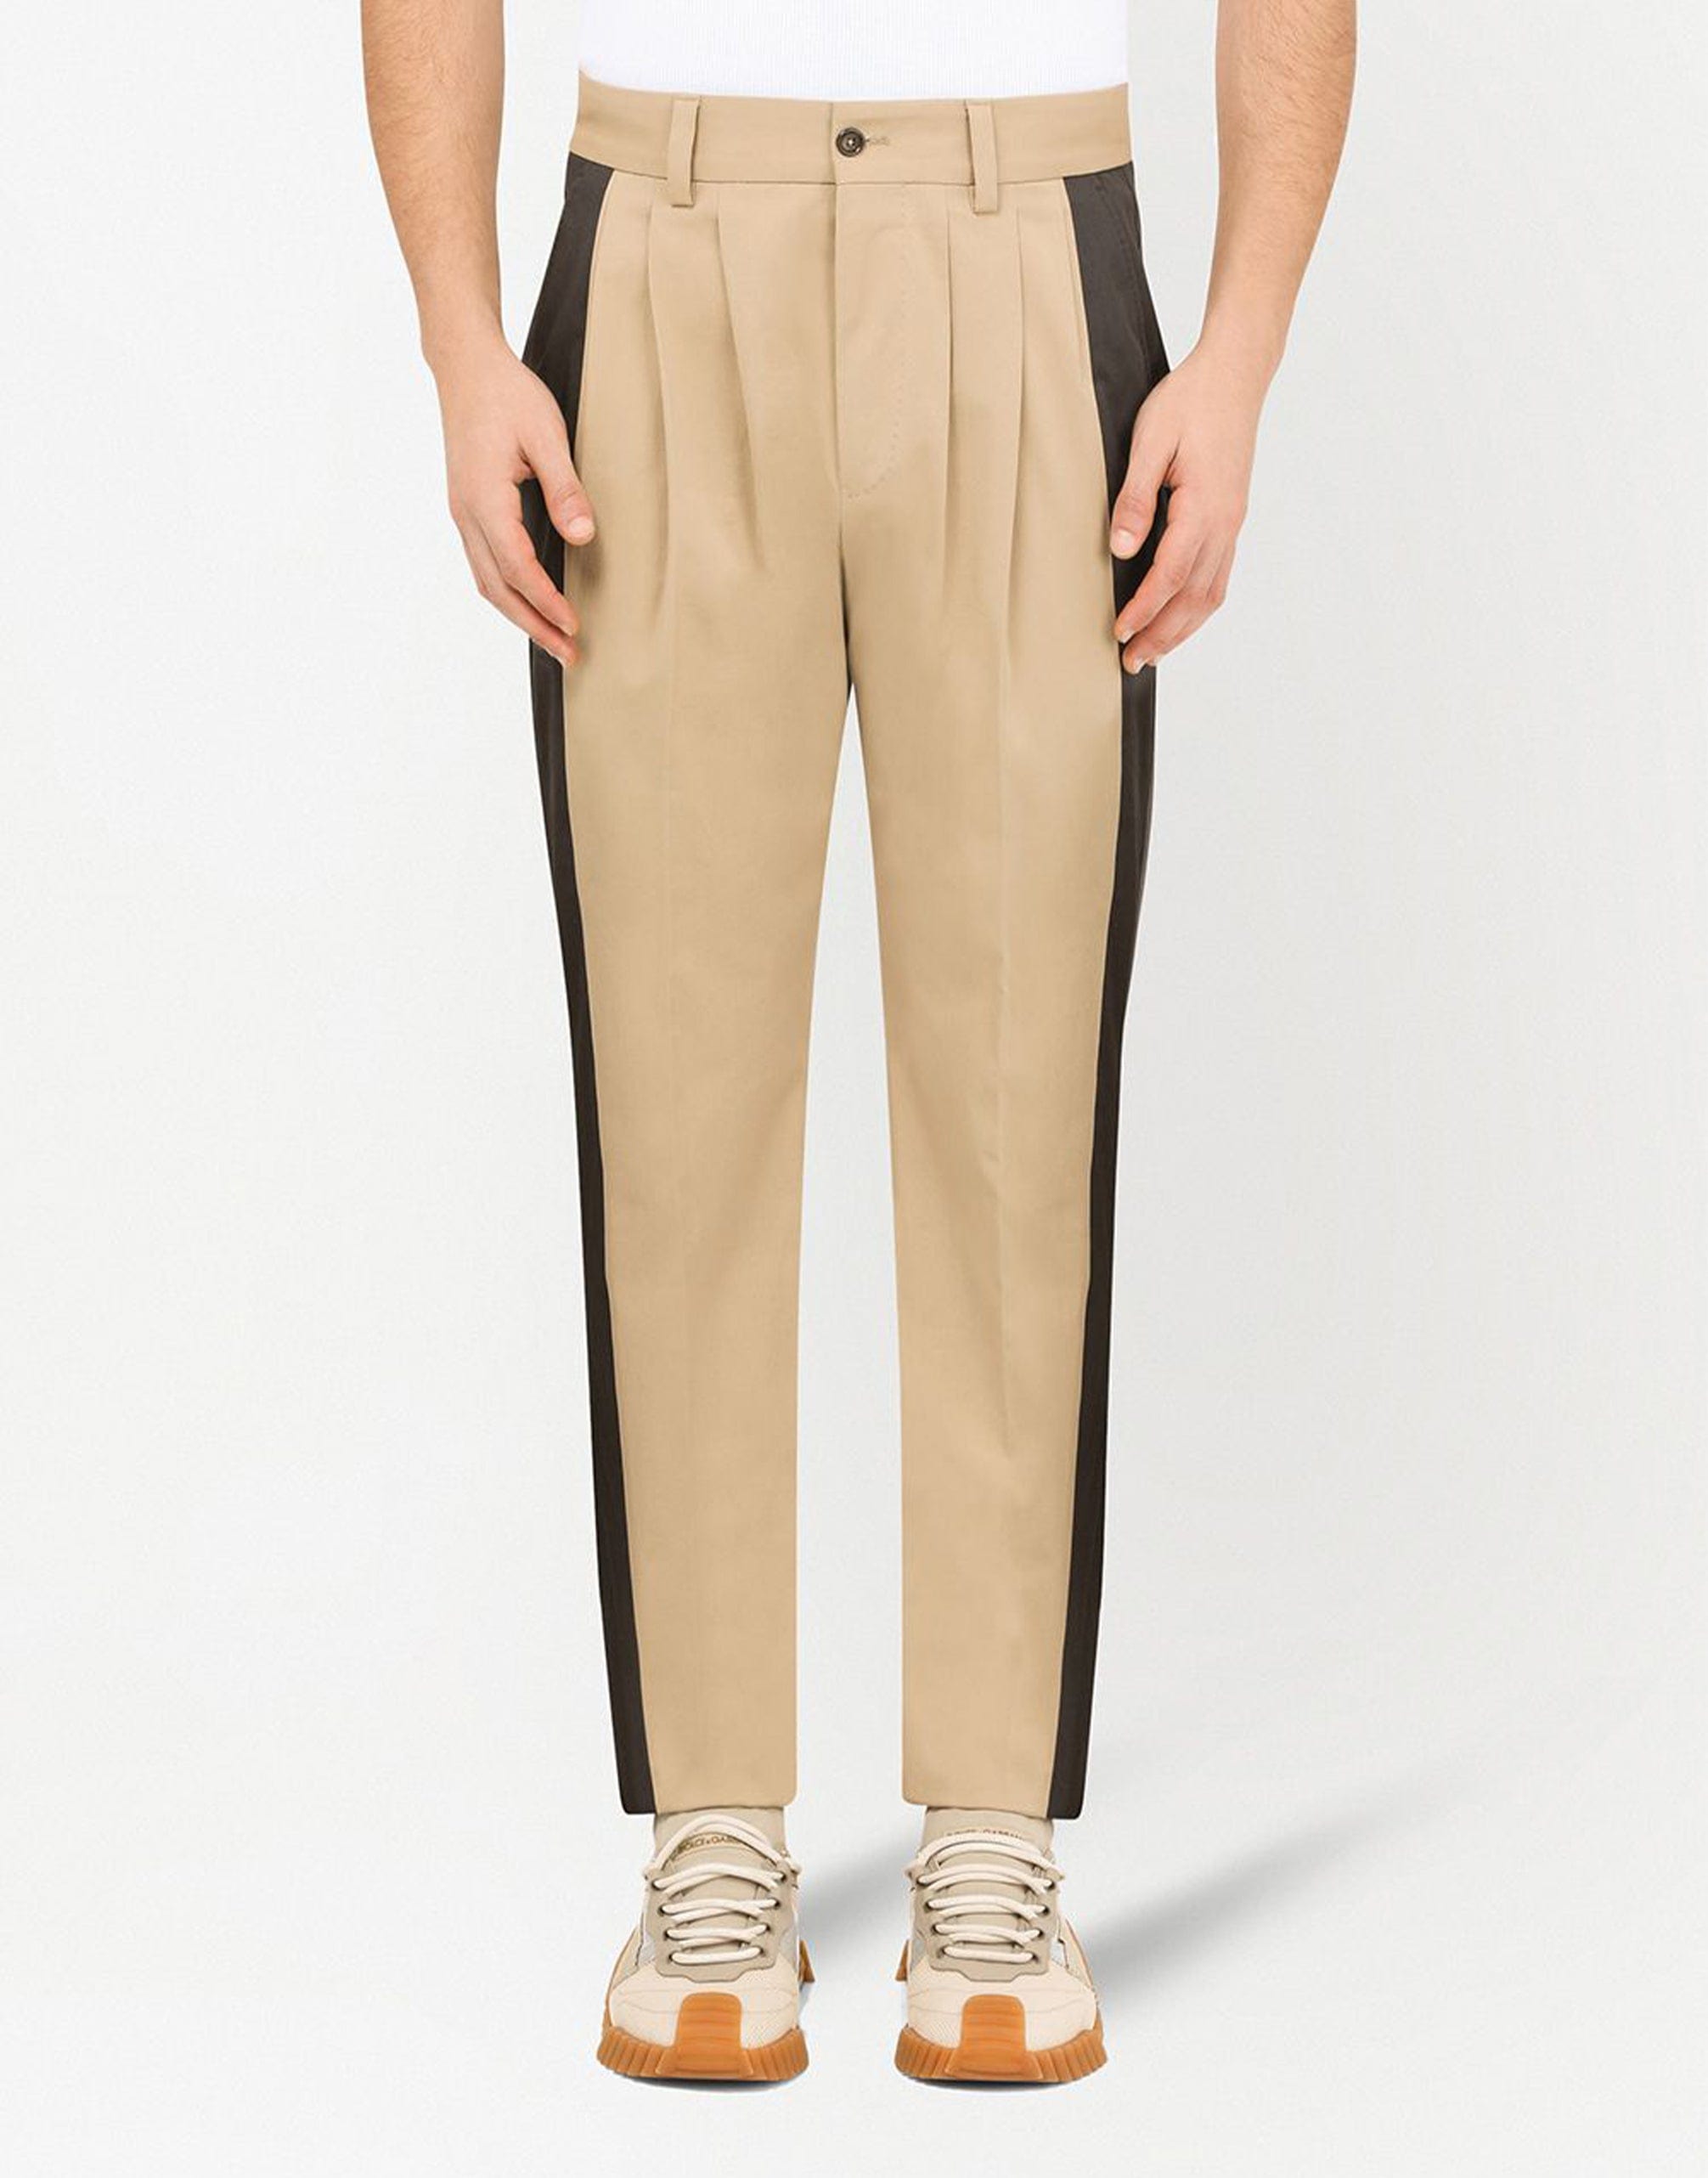 ASOS DESIGN skinny tuxedo suit pants in black with gold honeycomb effect side  stripe - ShopStyle